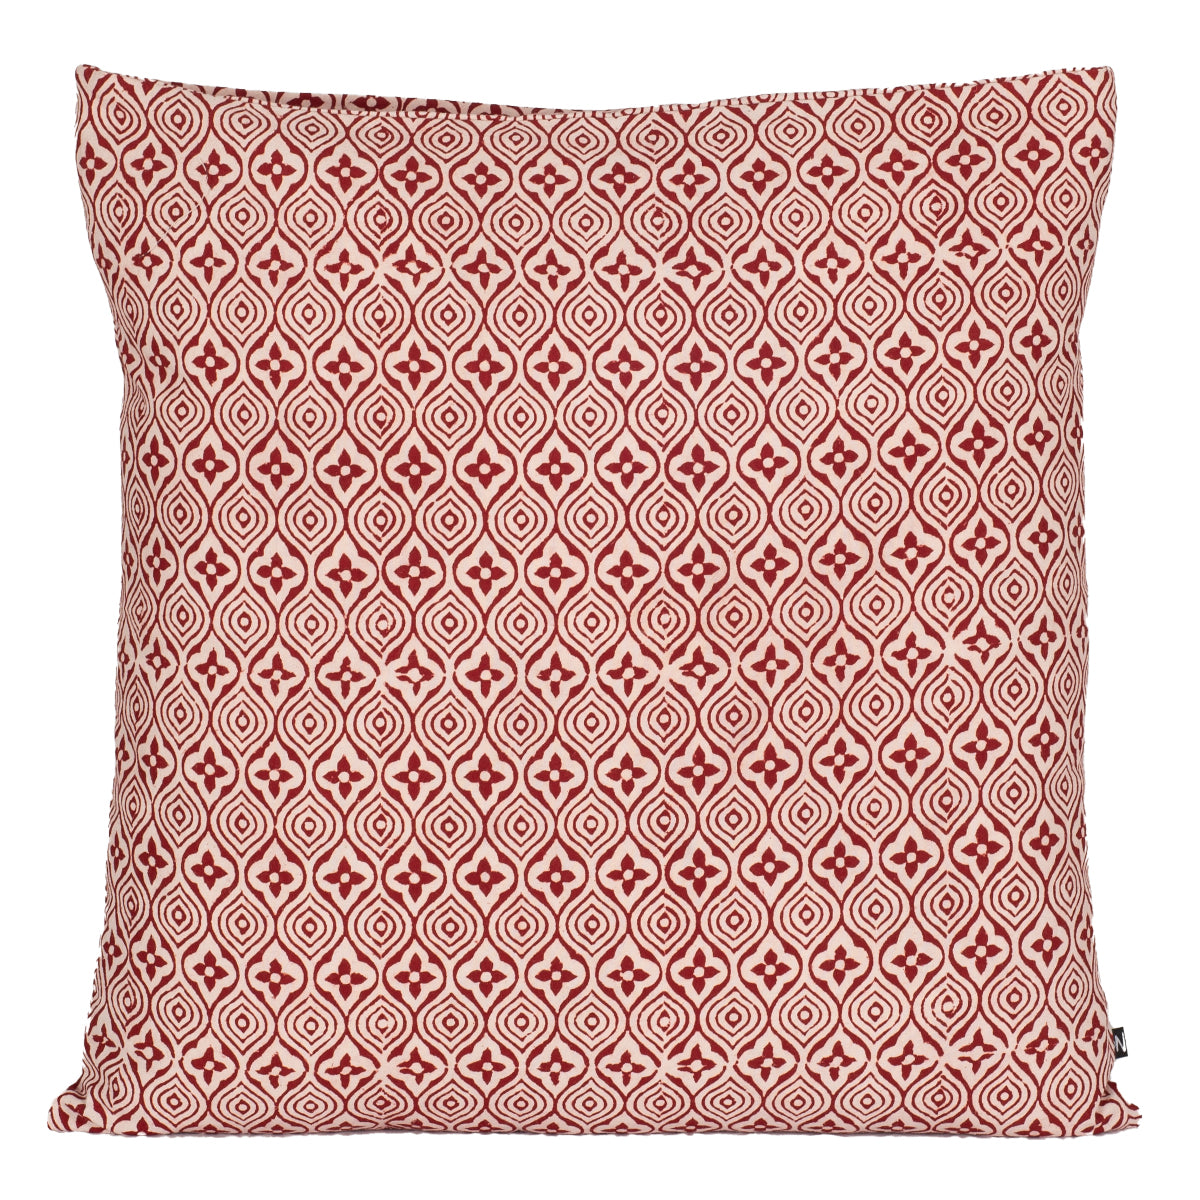 Geometric Pattern with Paisley Border Bagh Hand Block Print Cotton Cushion Cover - Red Black-3